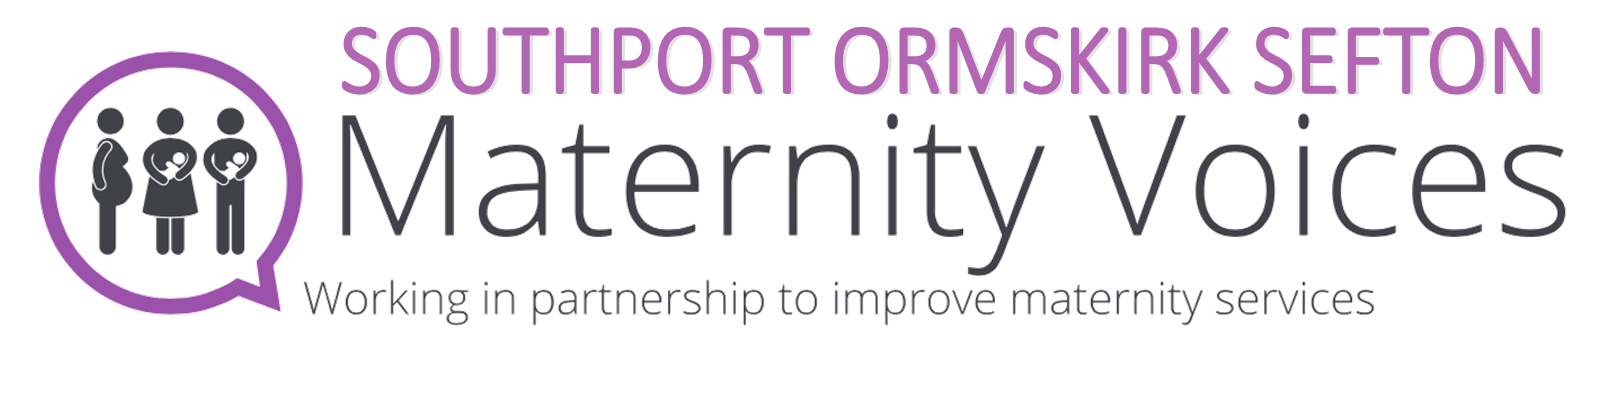 Maternity Voices Partnership banner